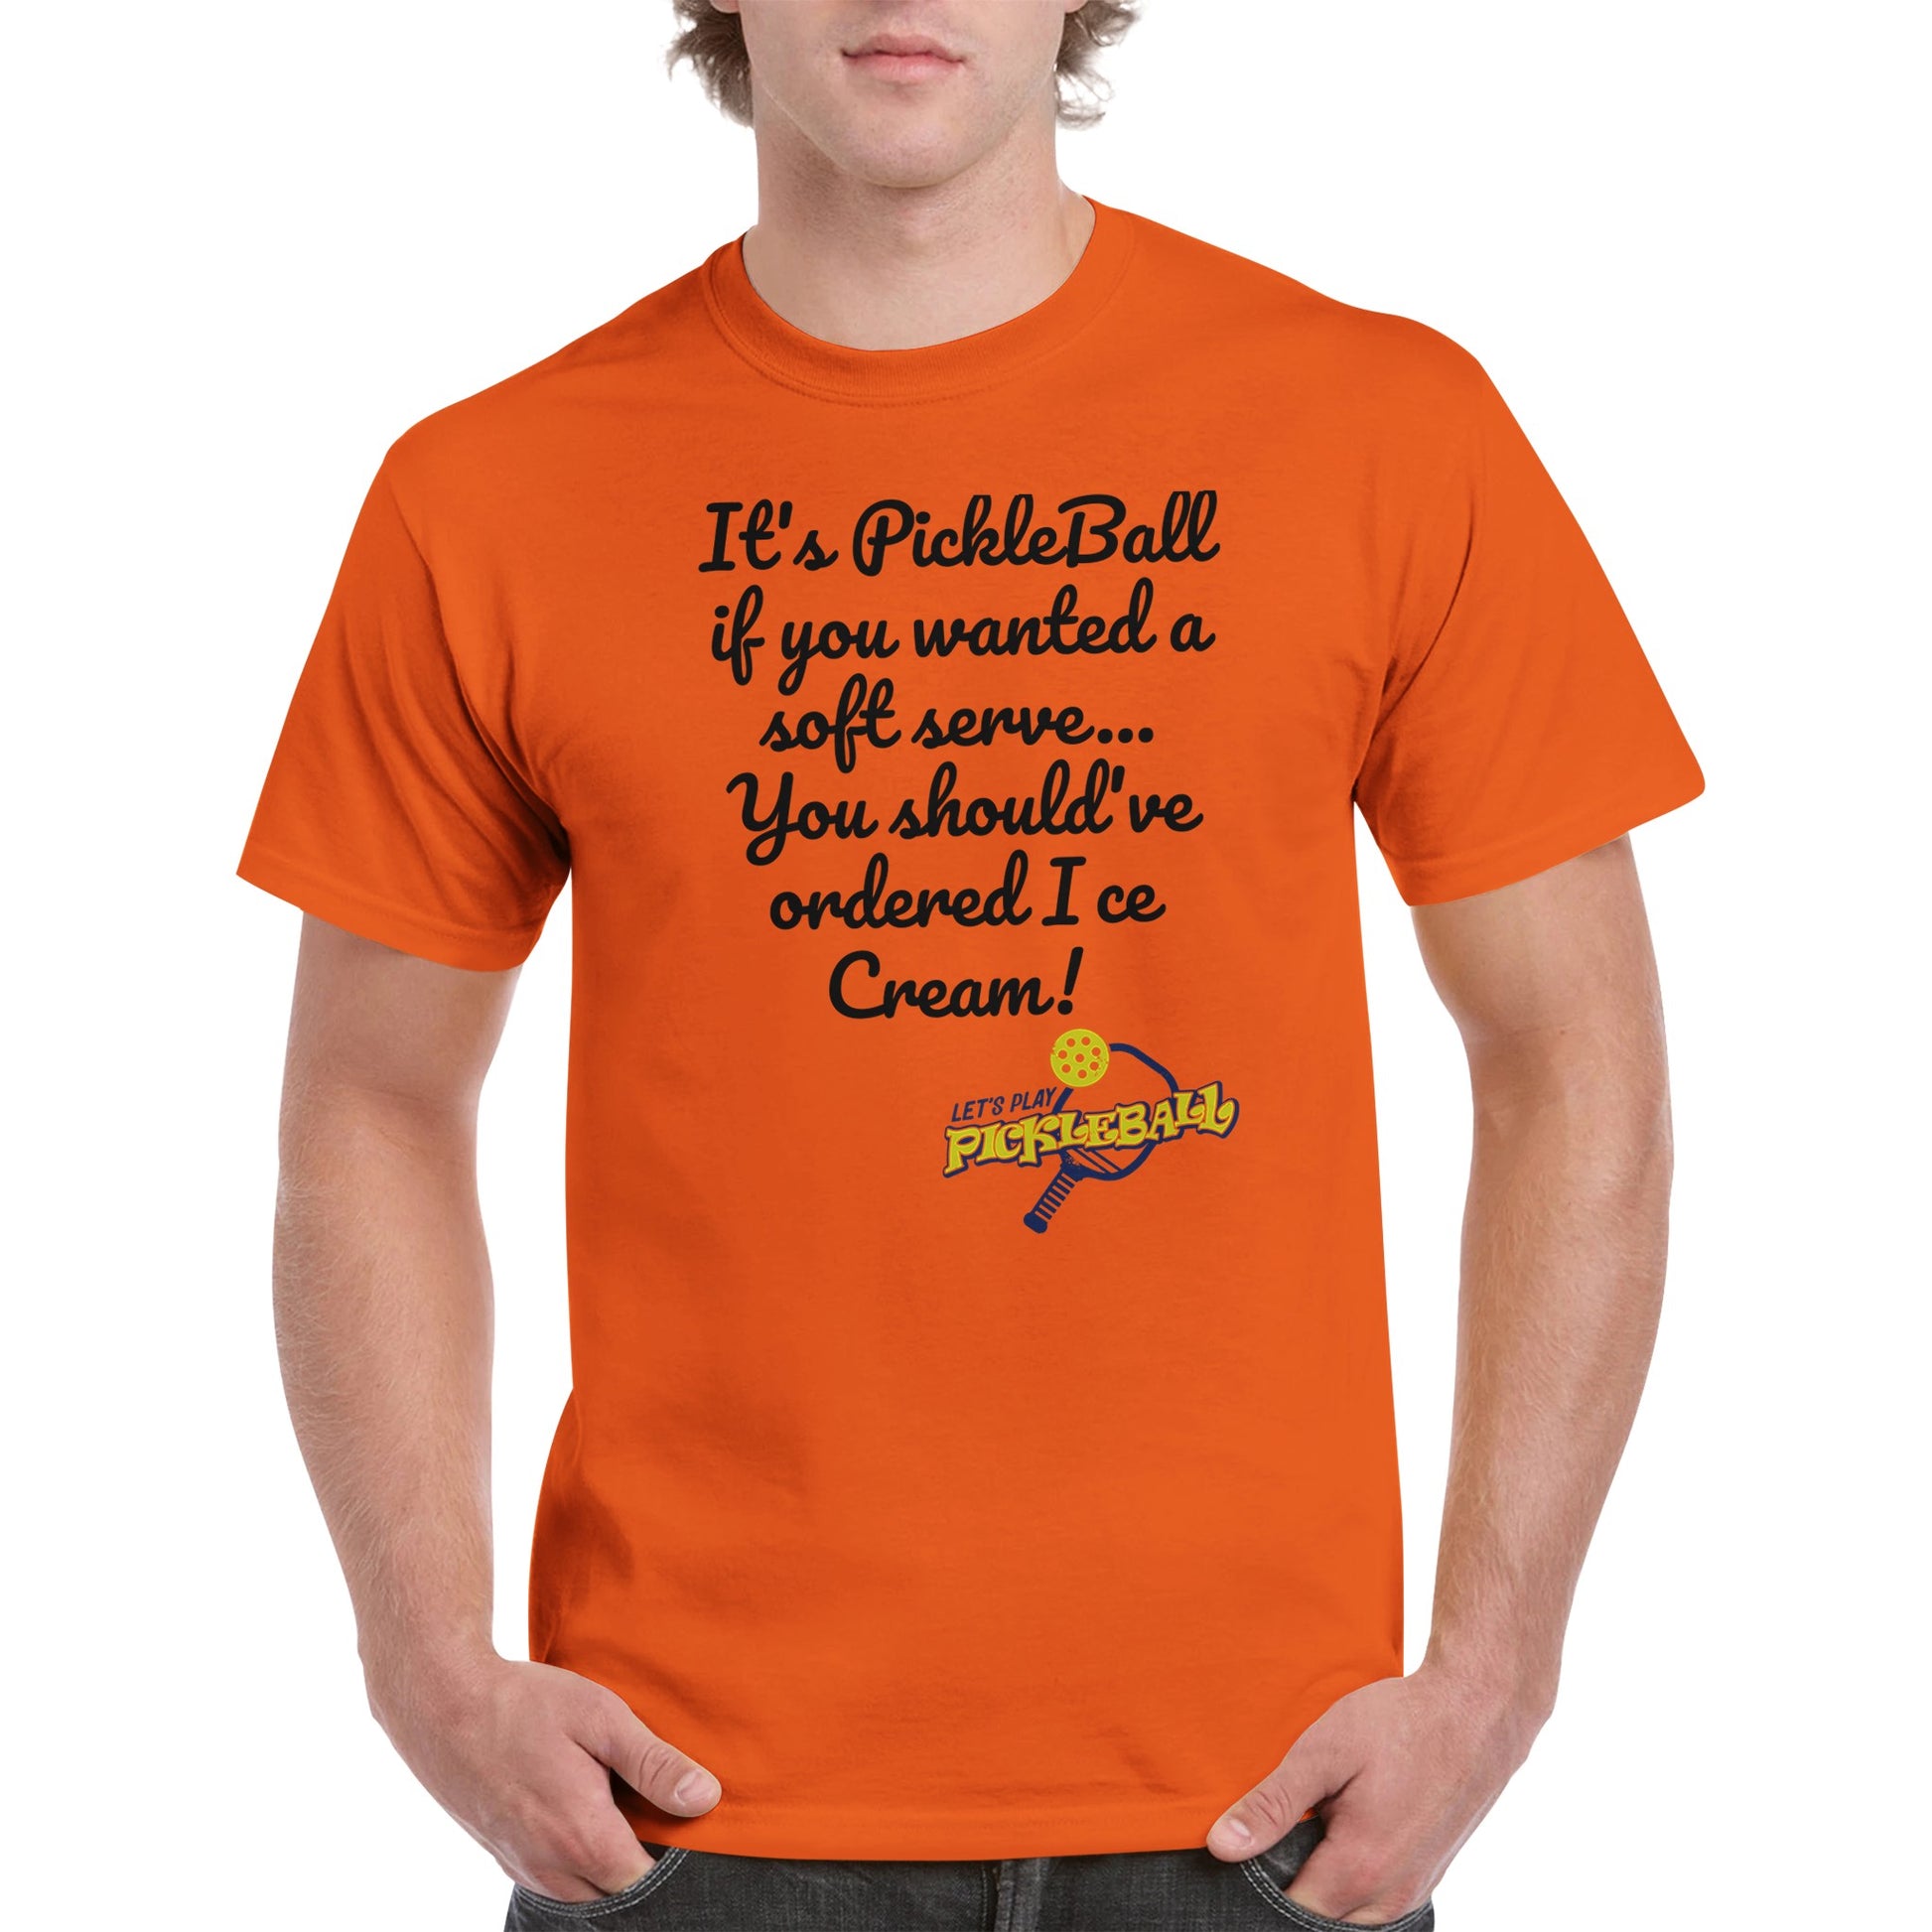 Orange comfortable Unisex Crewneck heavyweight cotton t-shirt with funny saying It’s PickleBall if you wanted a soft serve… You should’ve ordered Ice Cream! and Let’s Play Pickleball logo on the front from WhatYa Say Apparel worn by blonde-haired male front view.